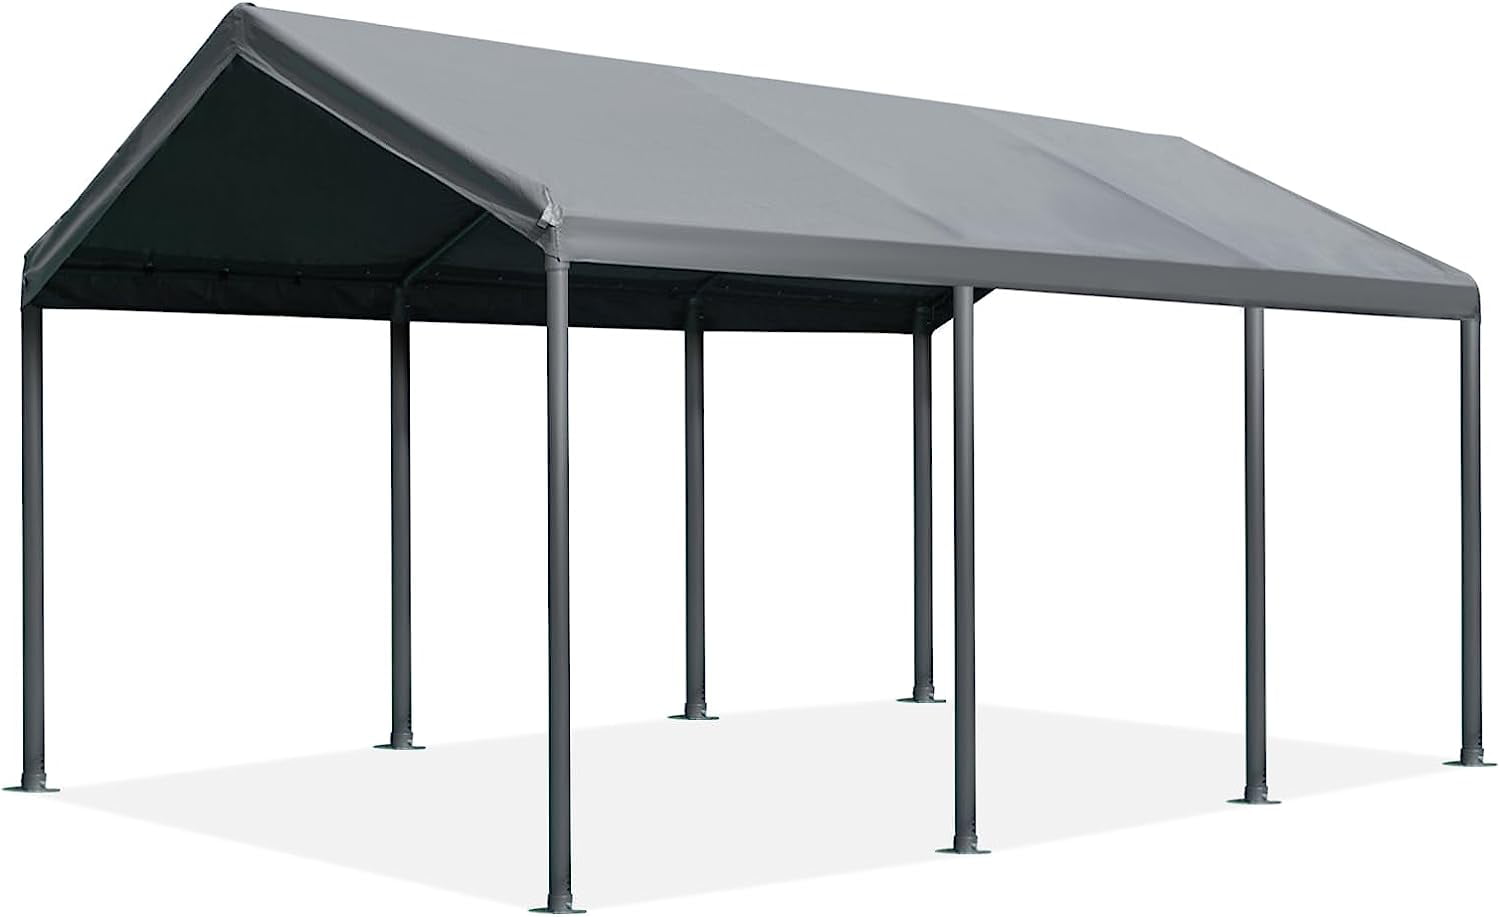  Litesort Metal Carport Canopy Portable Carports 20×20 feet  Heavy Duty Garage Steel Car Shelter Double Carports Kit Made by Steel Frame  and PVDF Roofing : Patio, Lawn & Garden